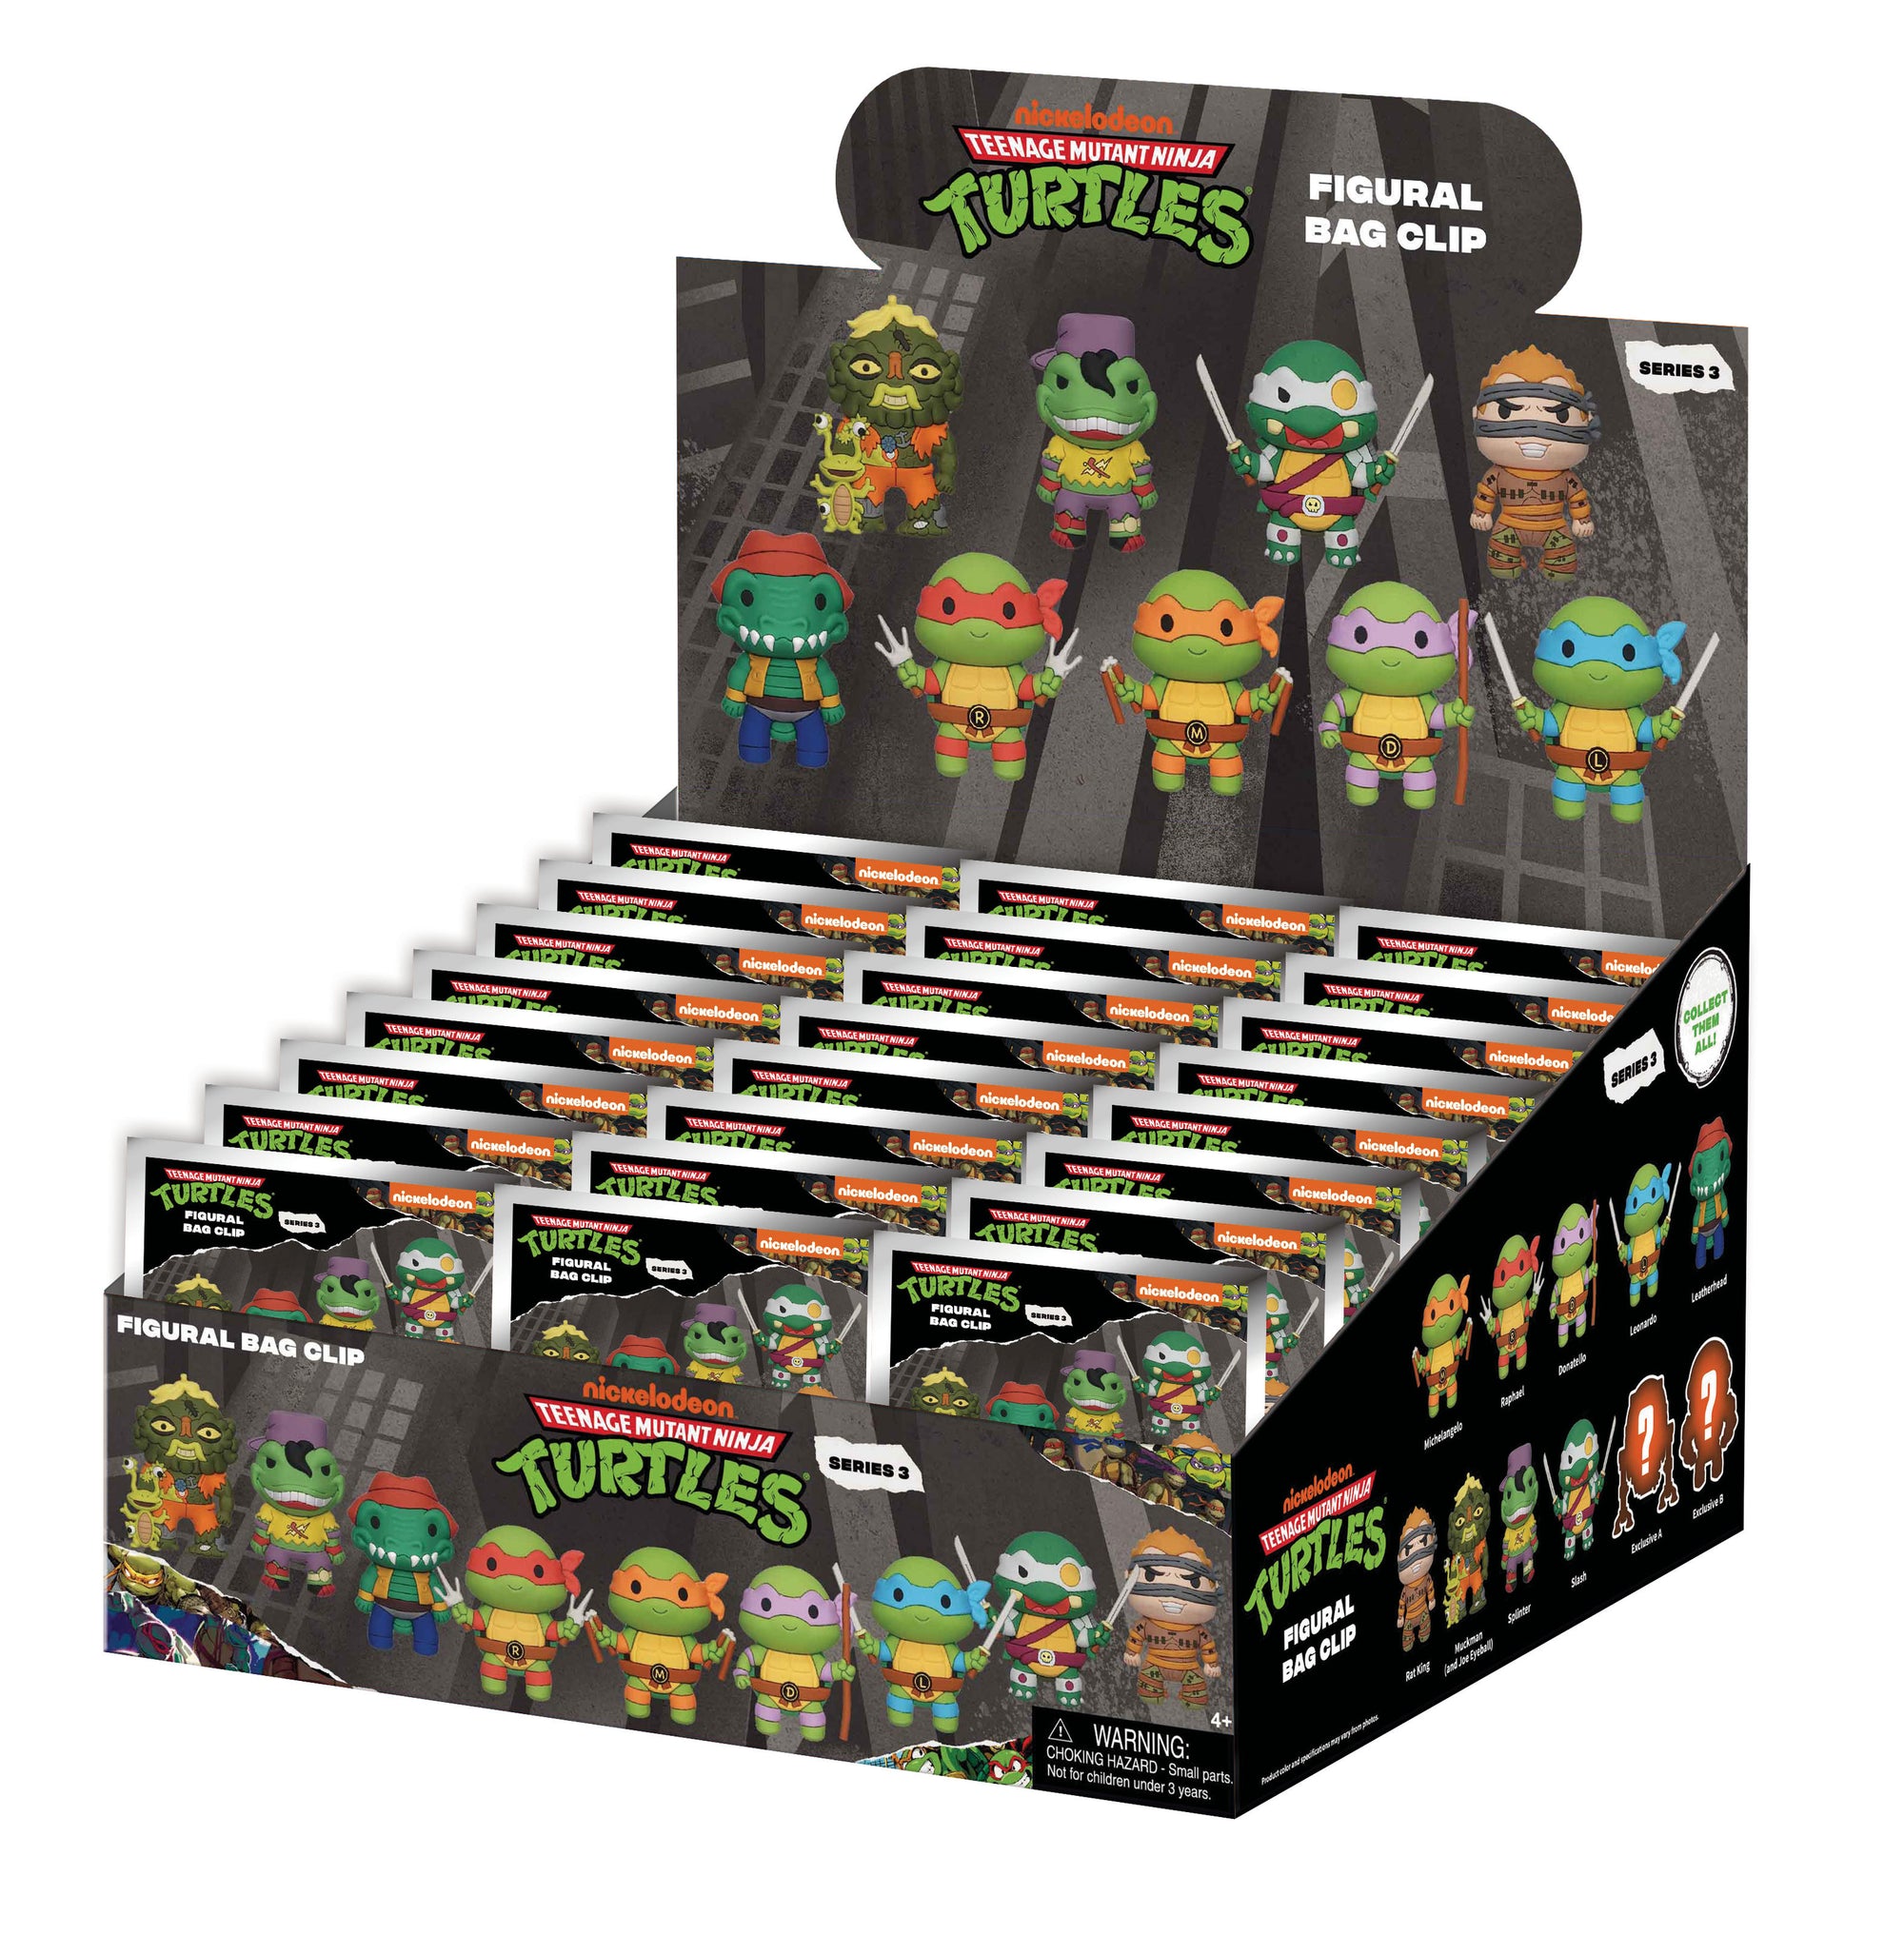 TMNT Retro Figural Bag Clip by Monogram Products